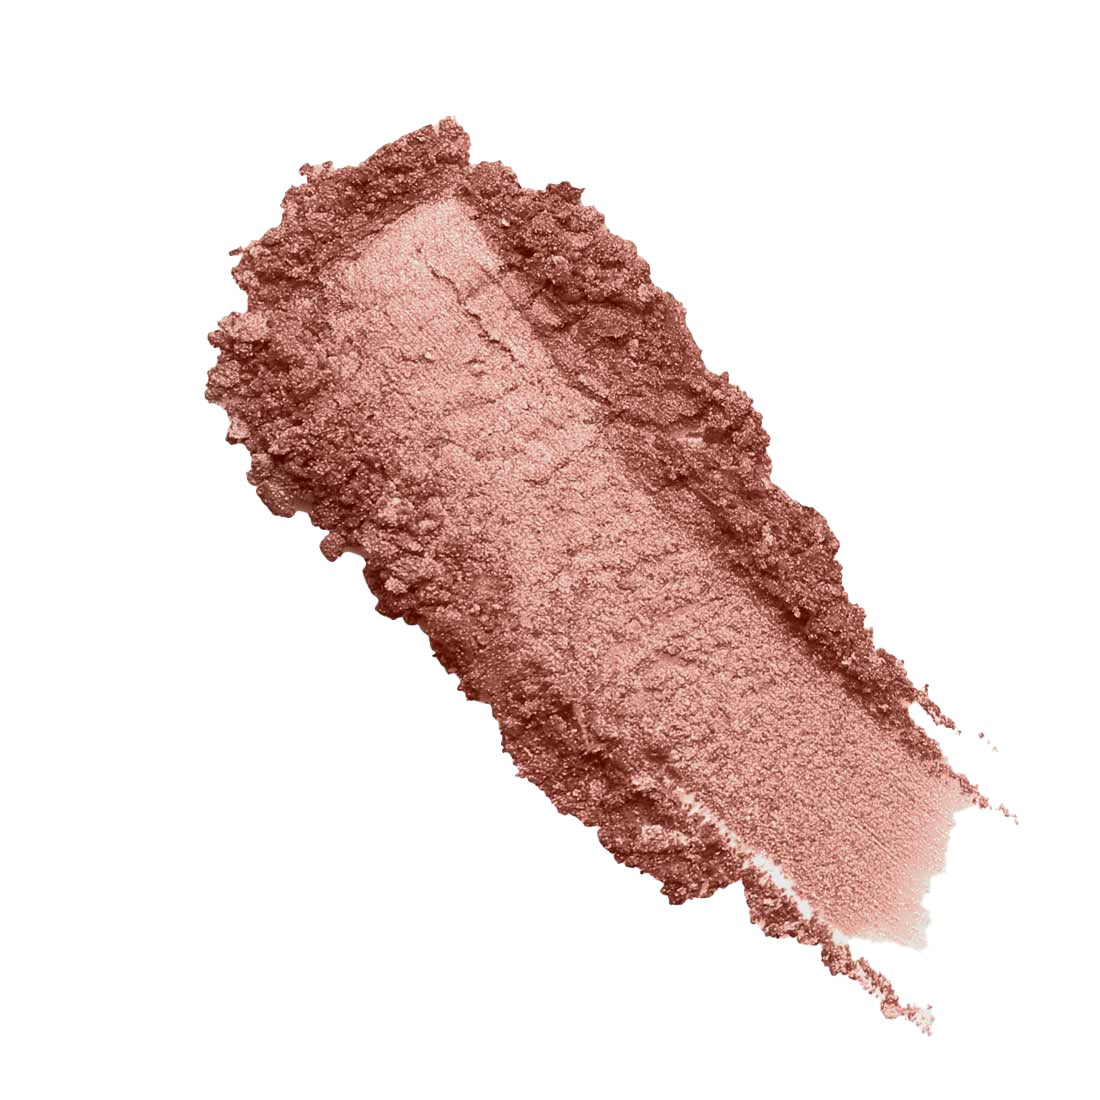 Highlighter - BlushBee Organic Beauty #